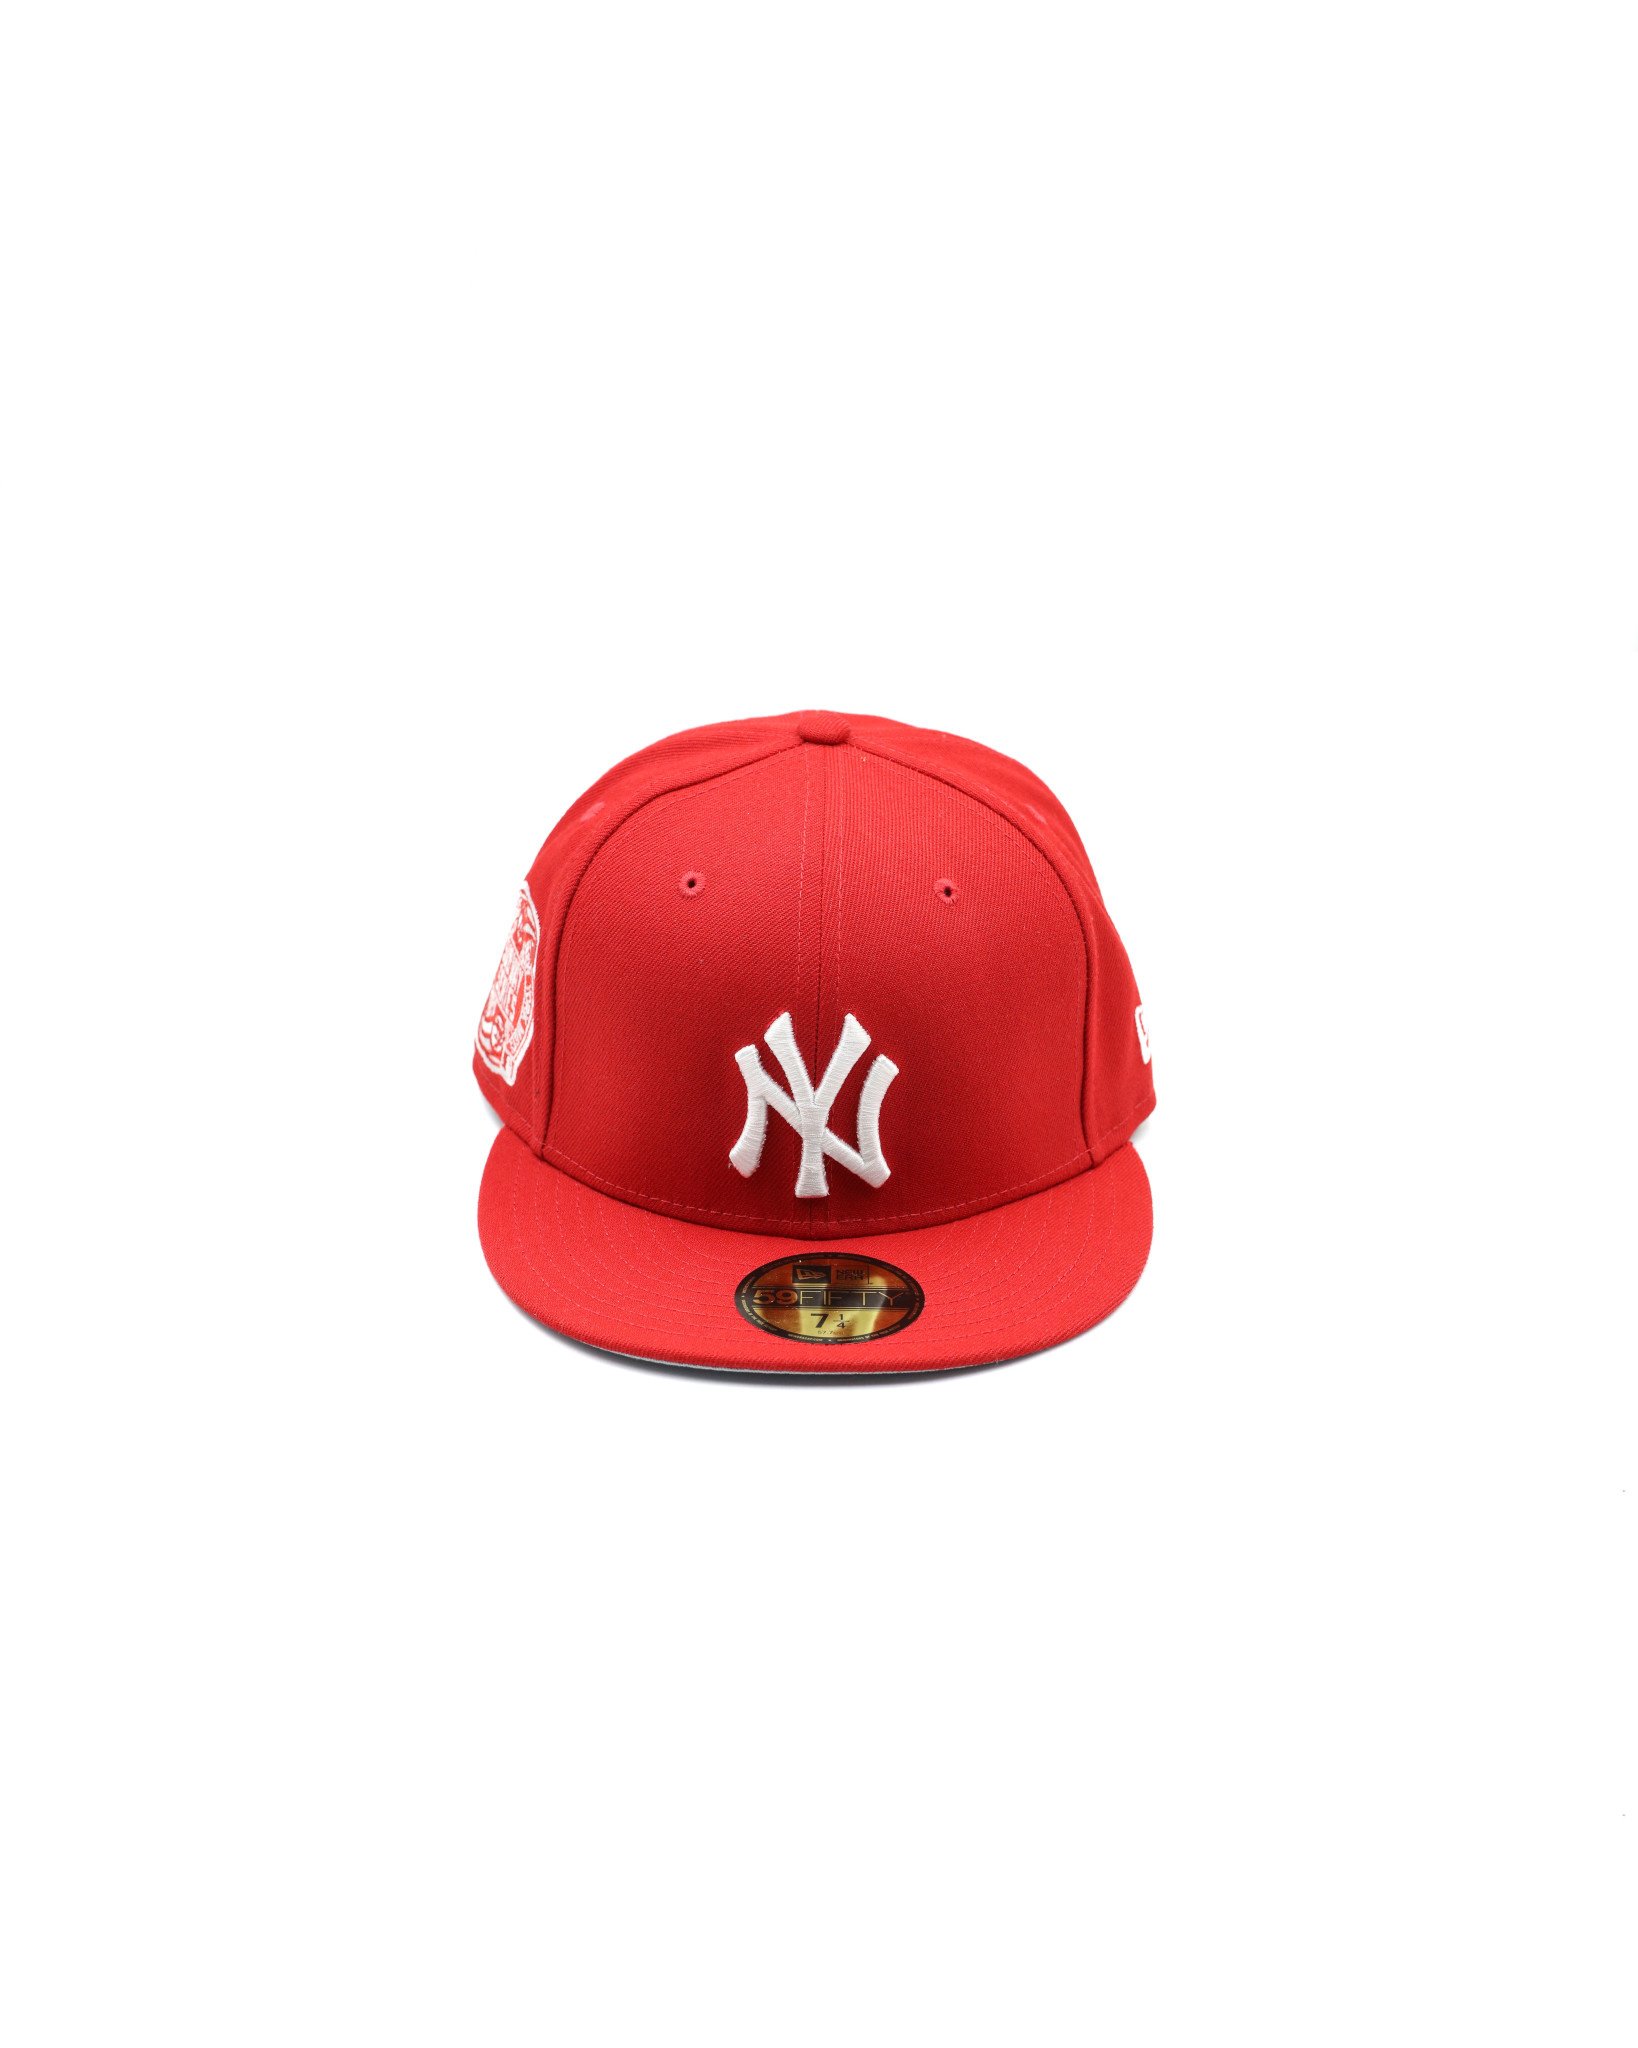 New York Yankees New Era White Logo 59FIFTY Fitted Hat - Red